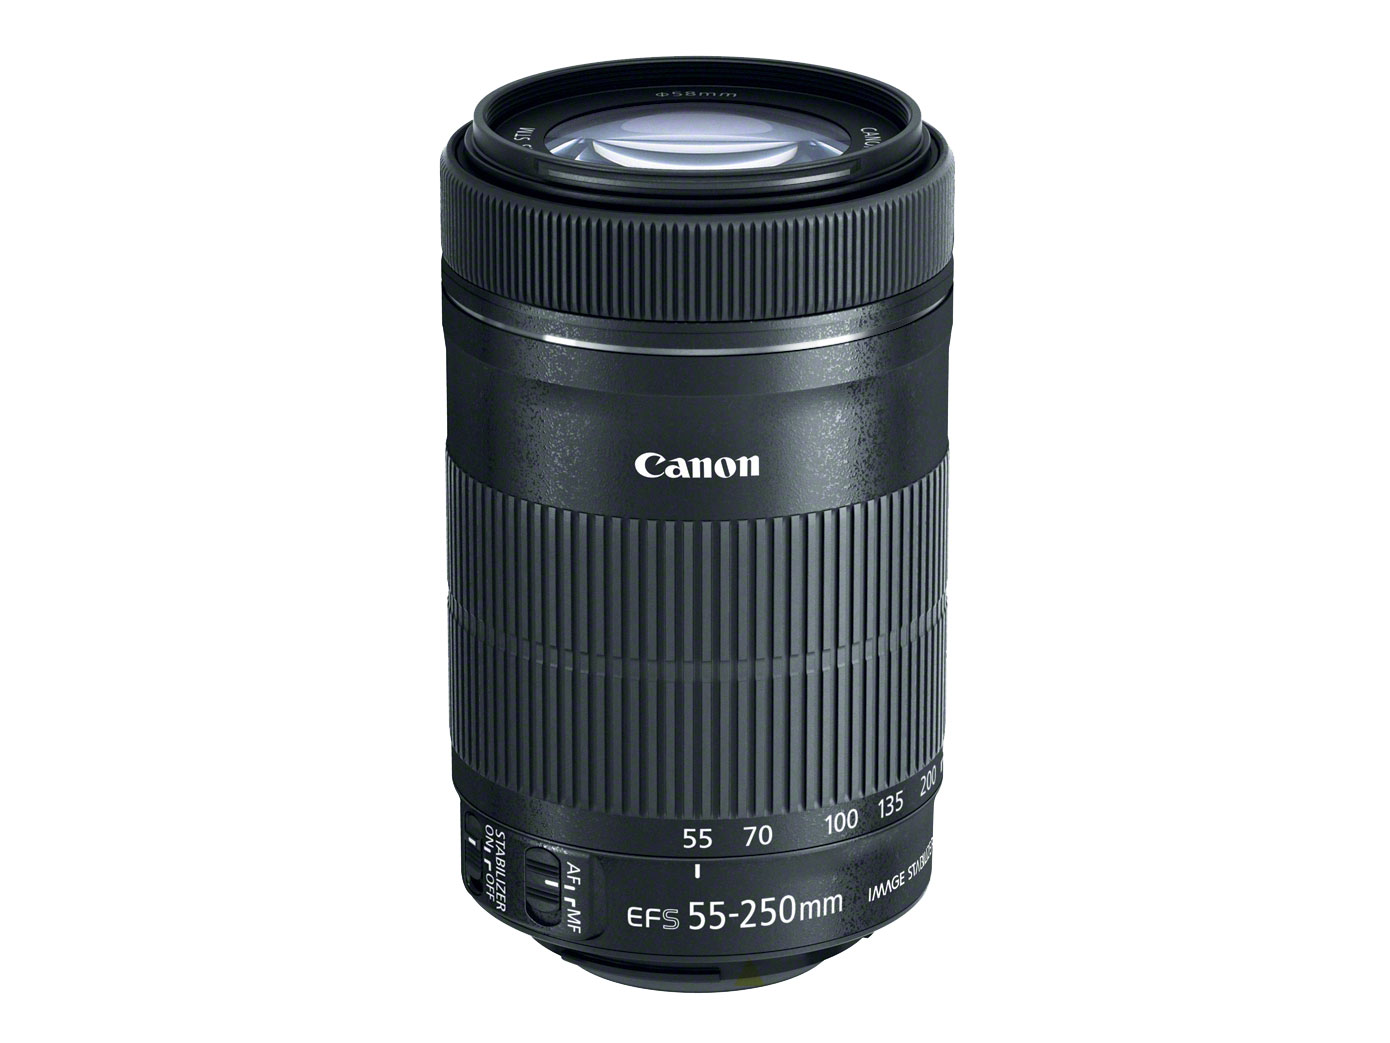 EF-S 55-250mm f/4-5.6 IS STM Lens announced, Price, Specs, Release Date,  Where to Buy – Camera News at Cameraegg